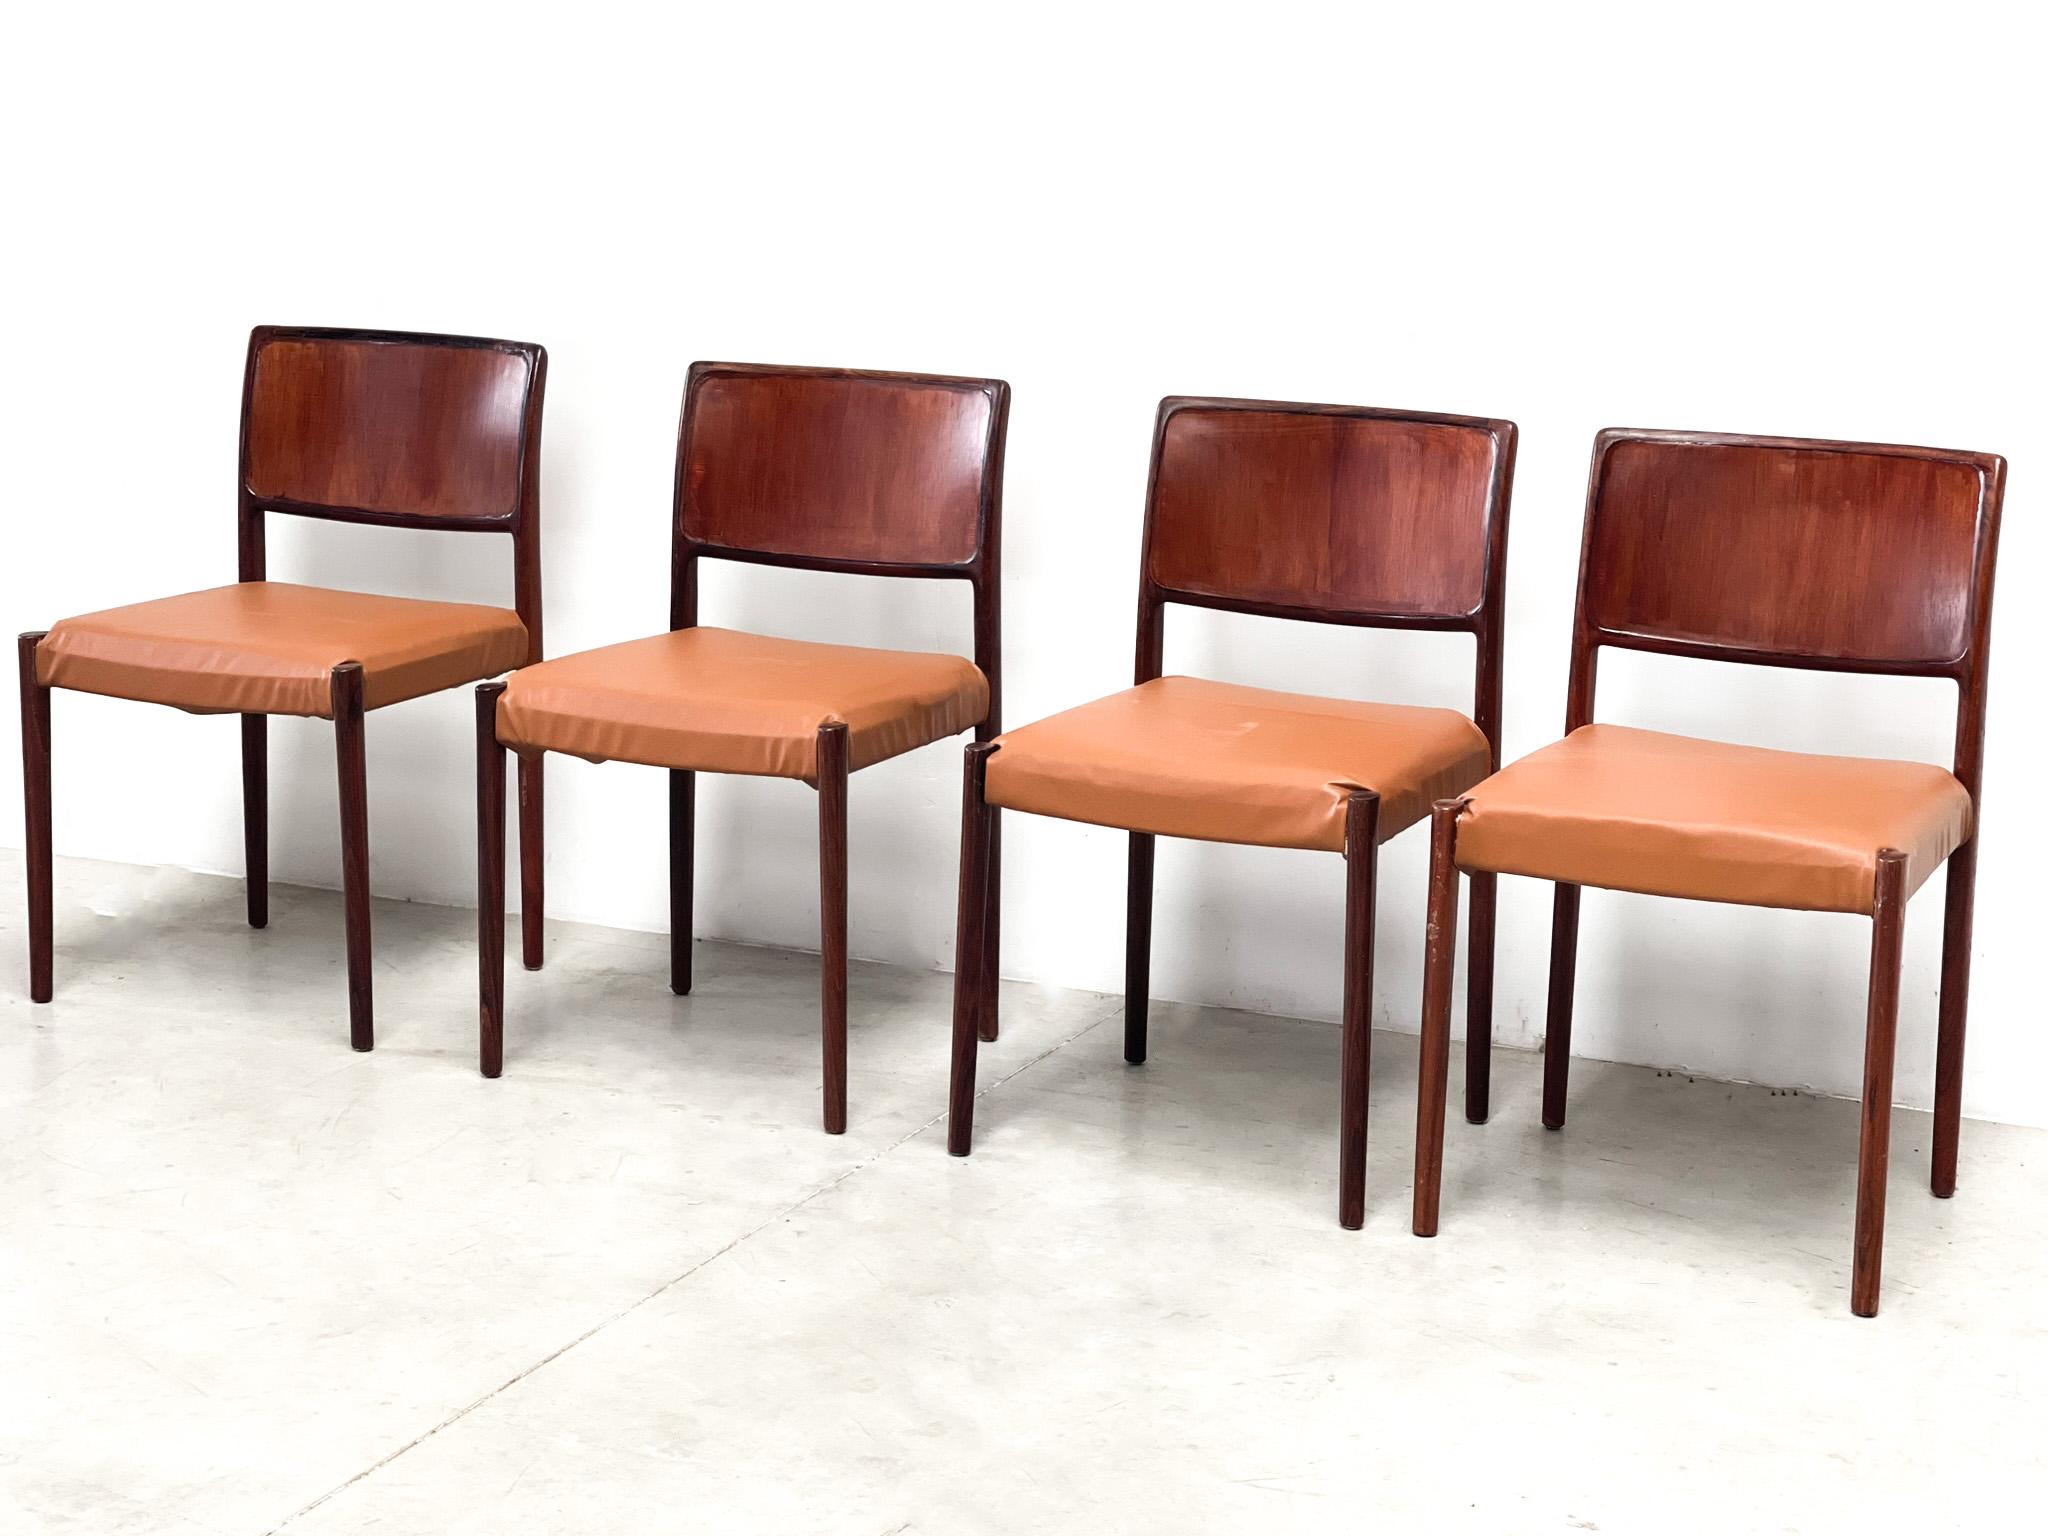 Vintage scandinavian dining chairs, 1970s For Sale 1